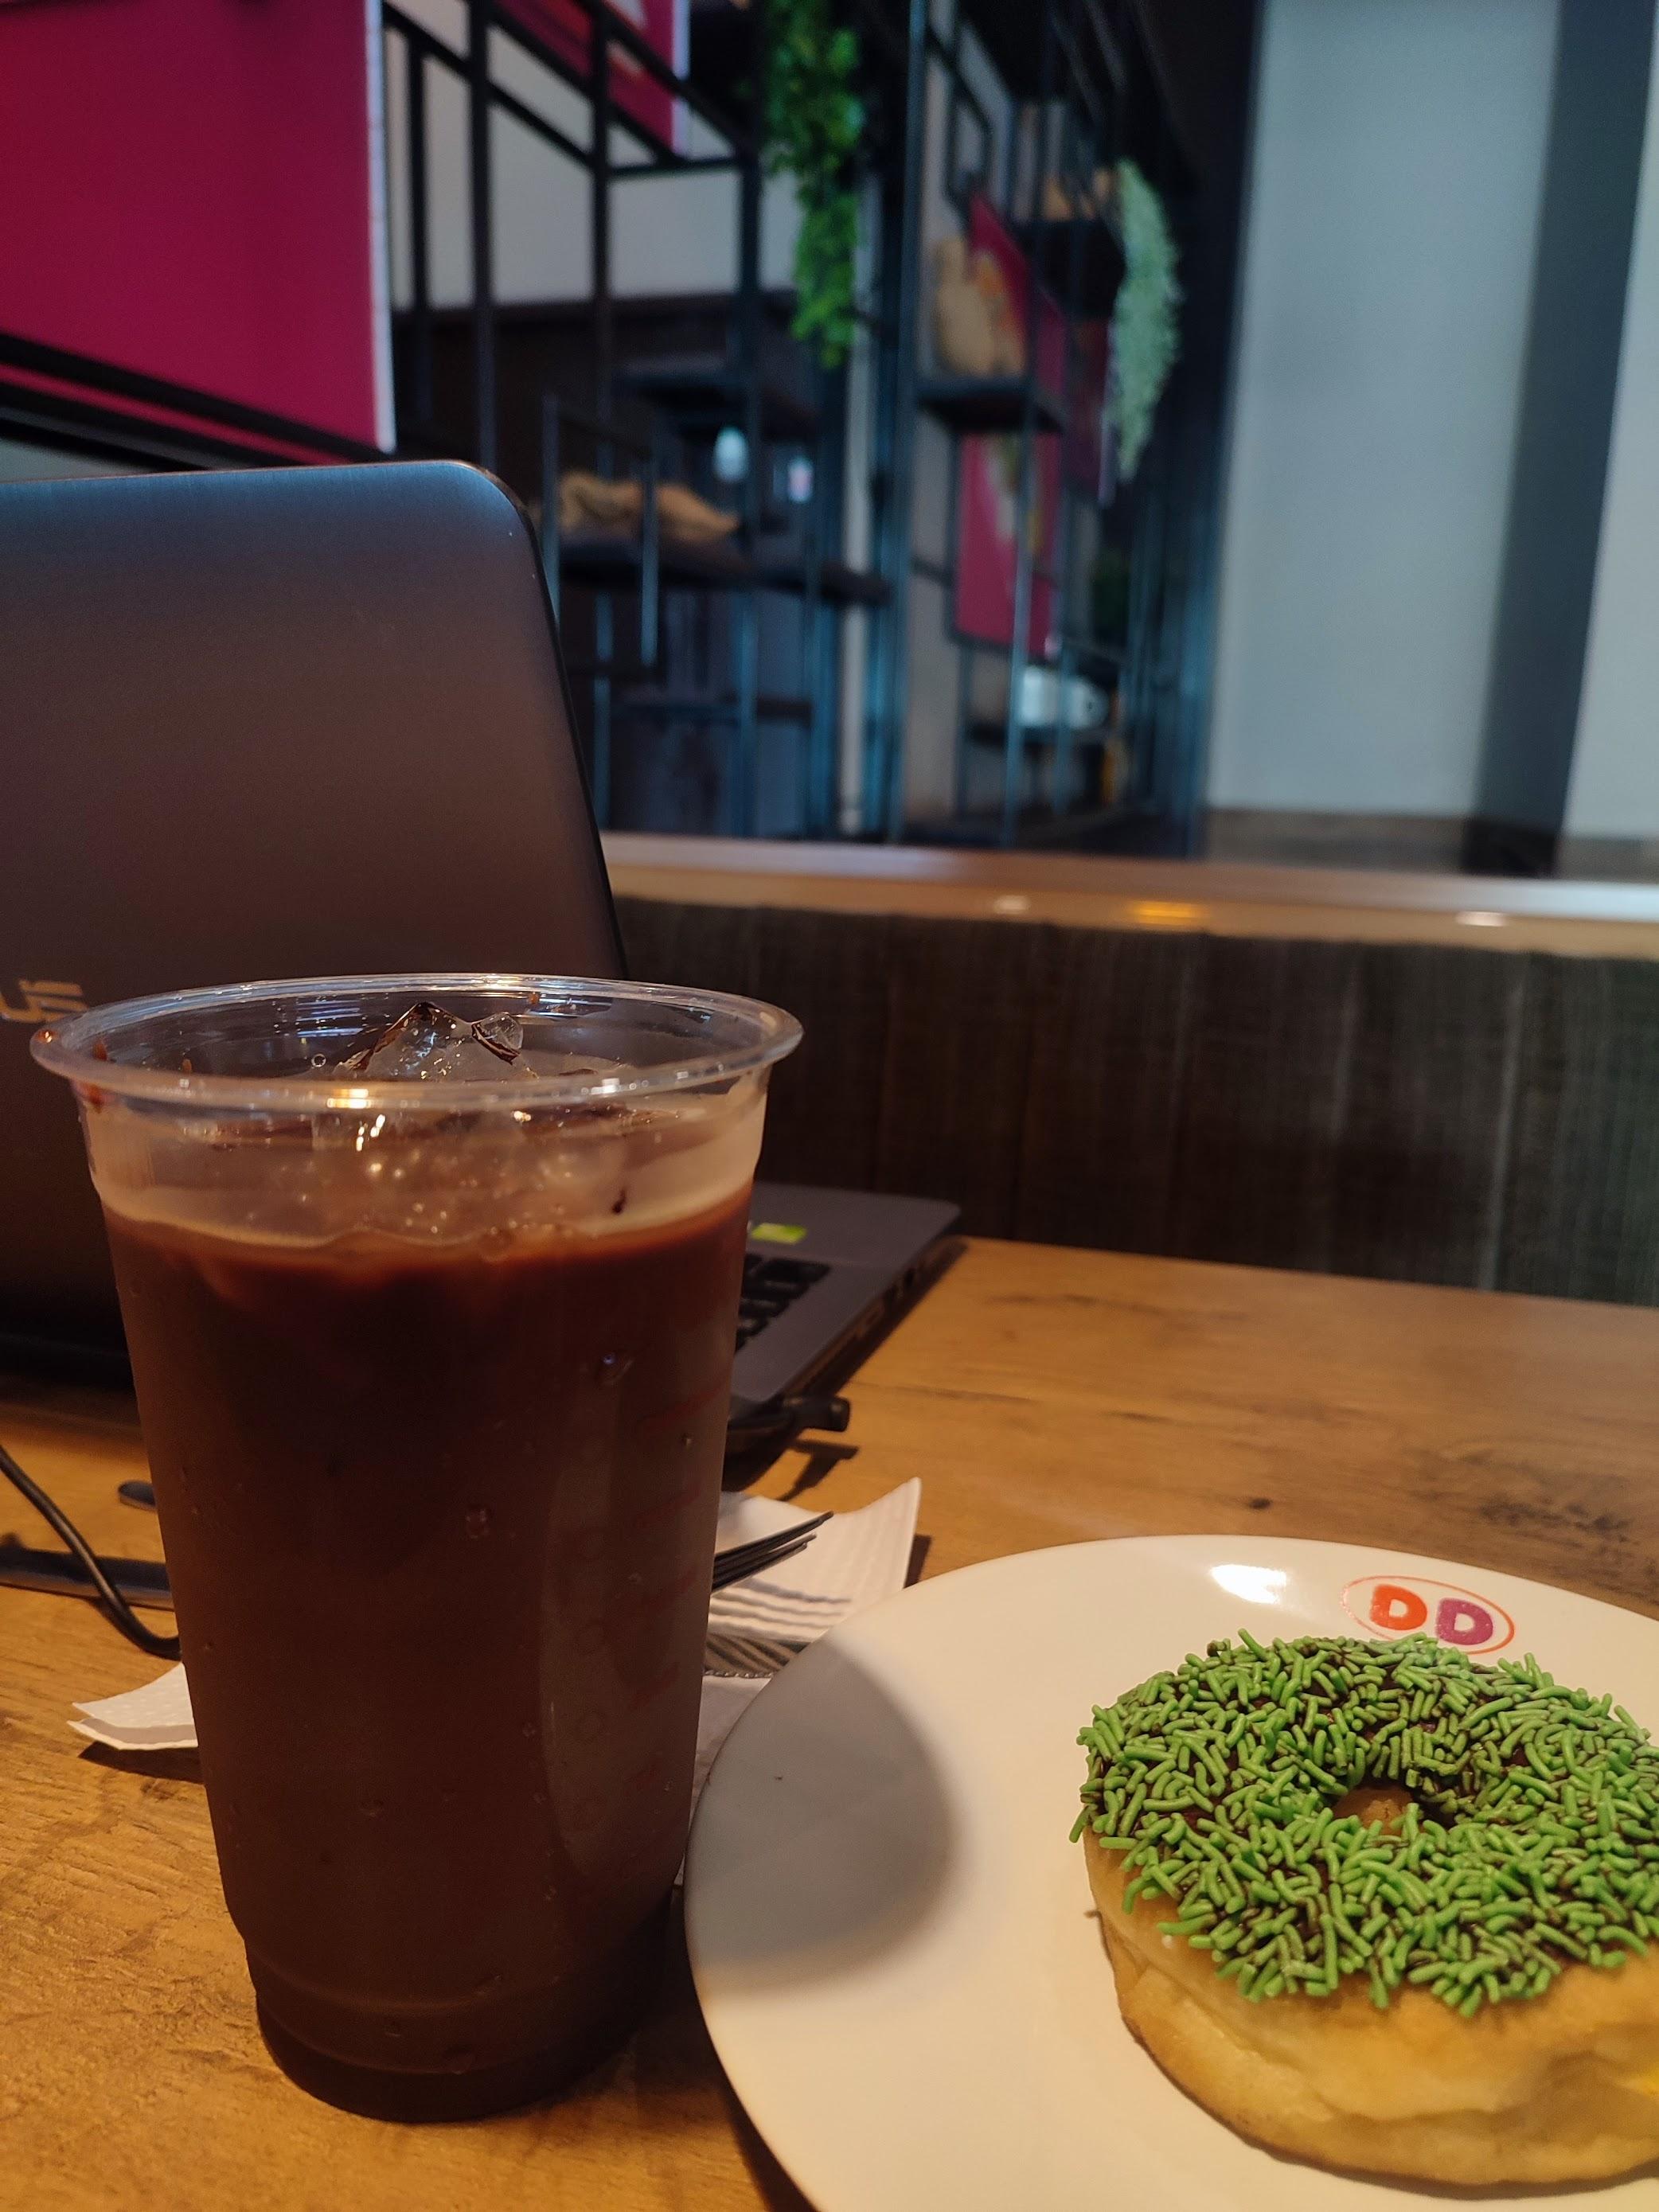 Dunkin’ Donuts Ceger Raya review